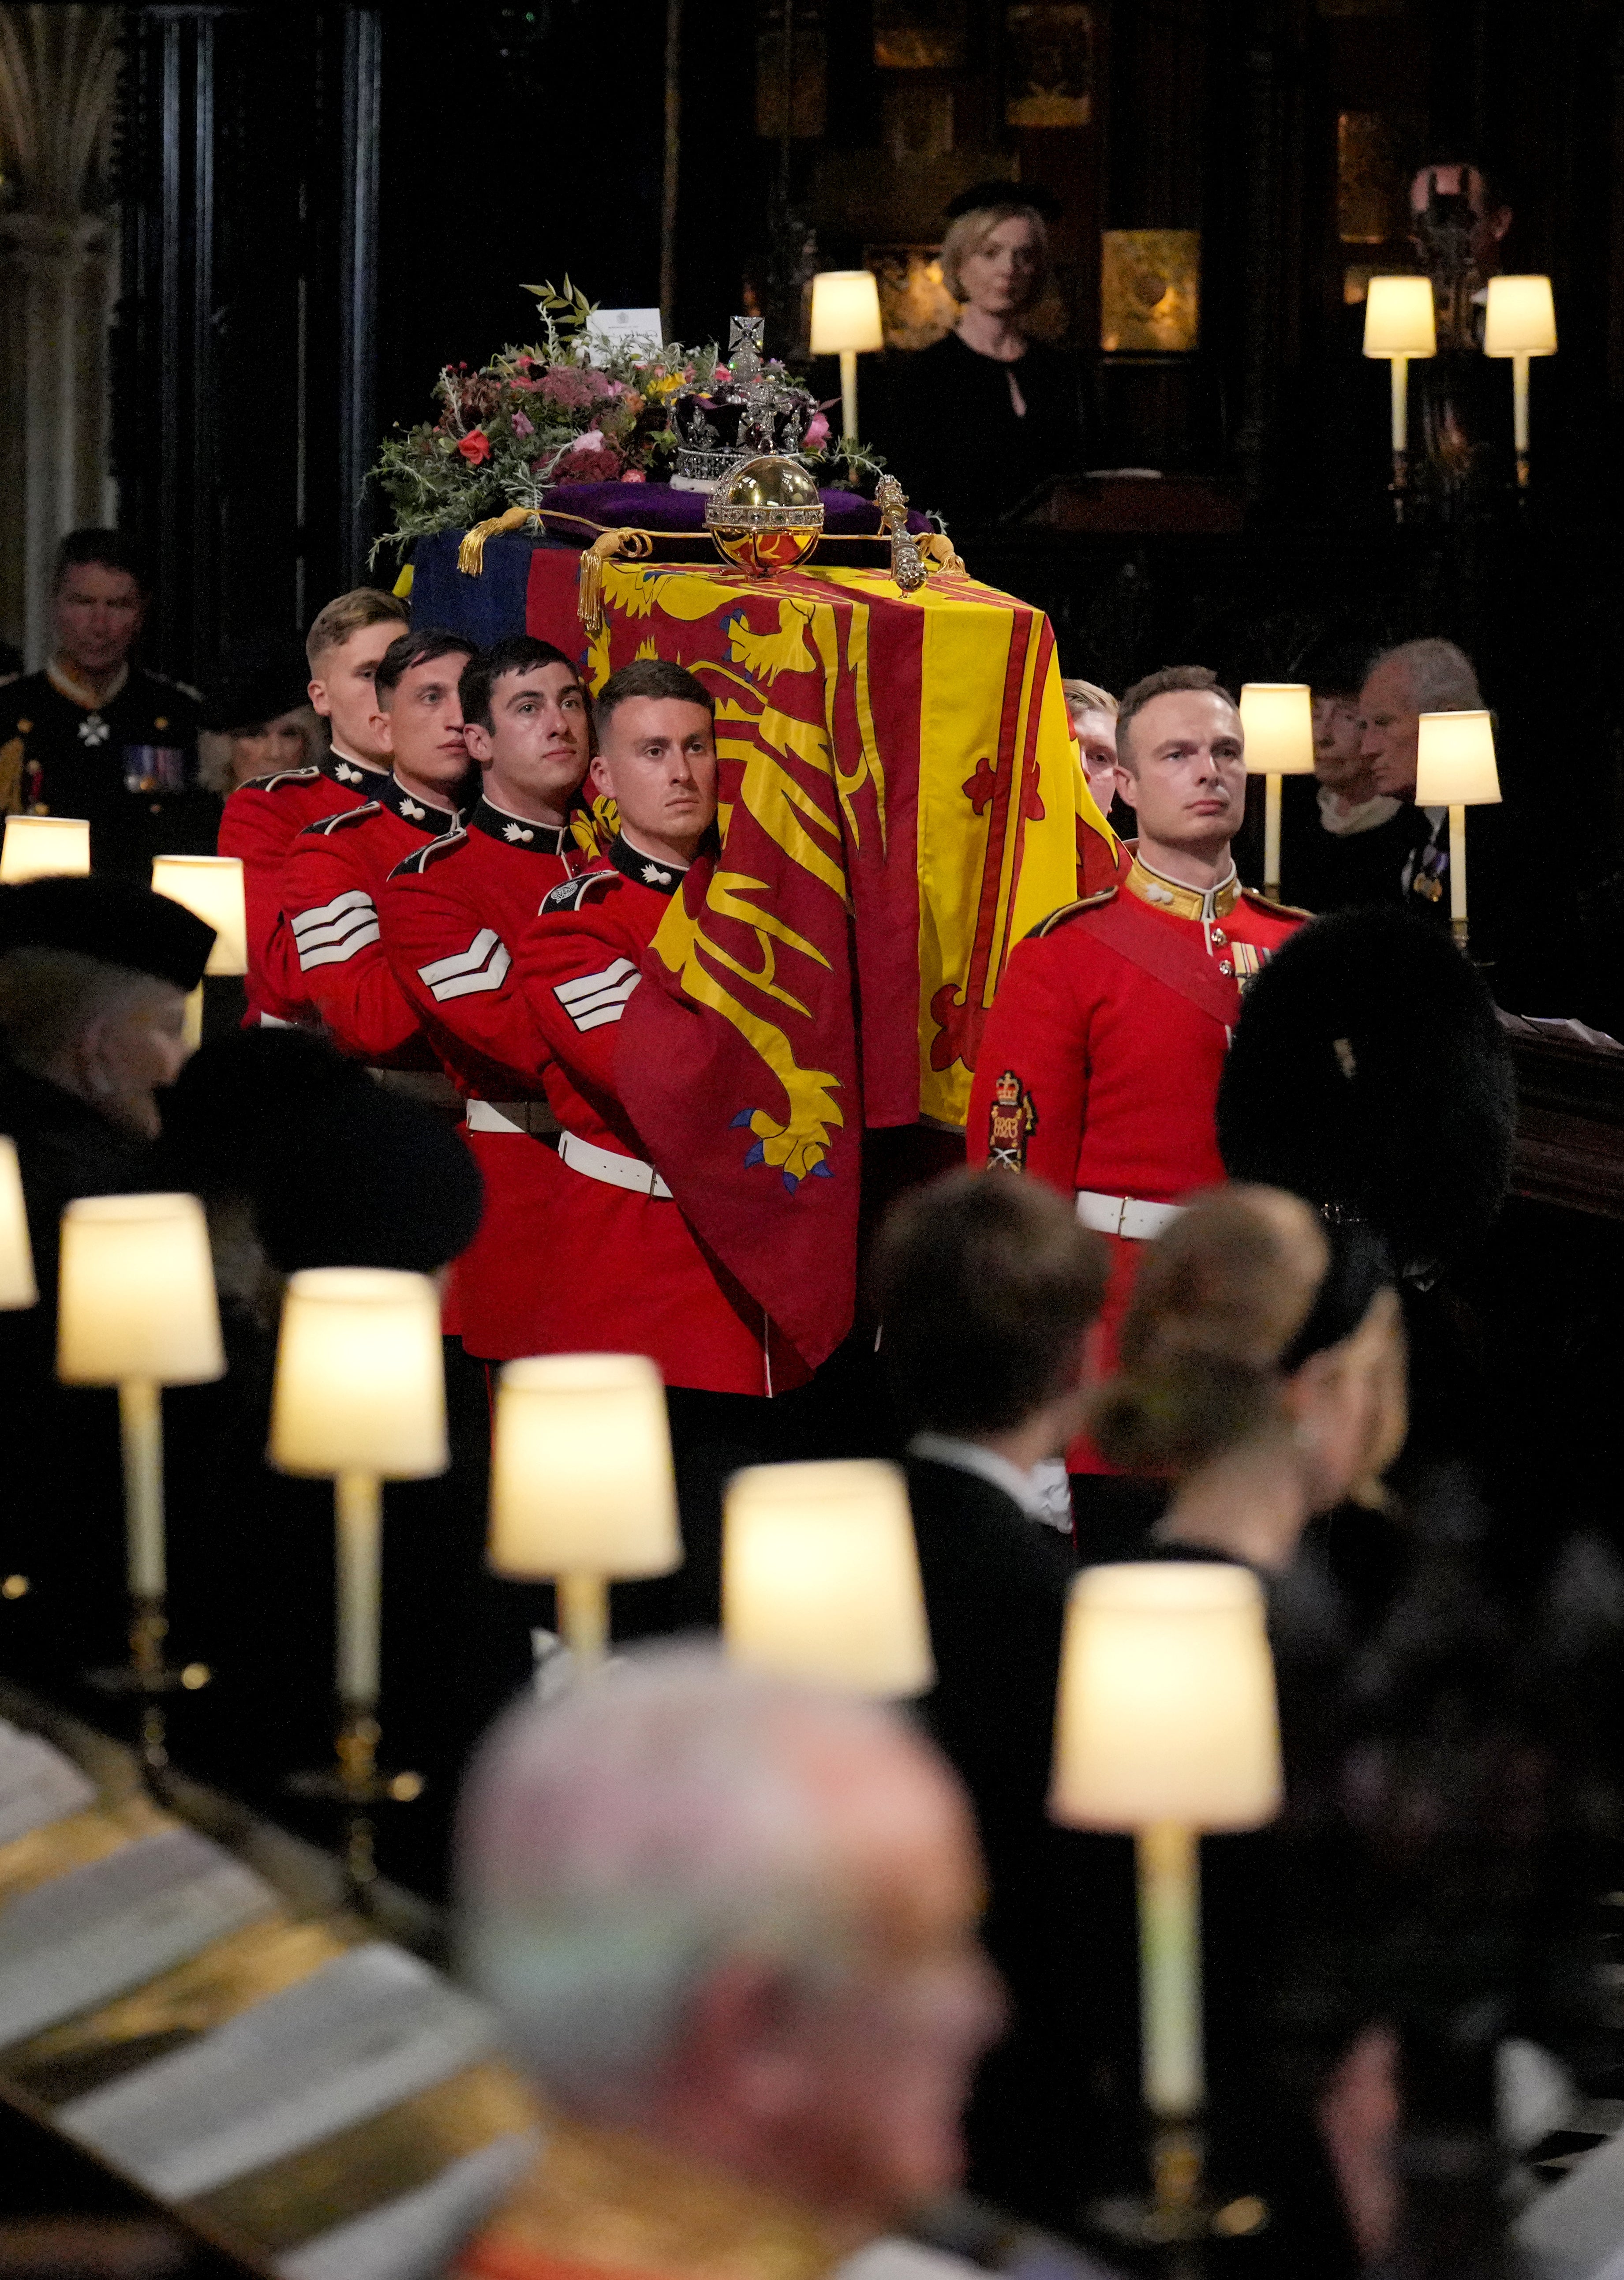 The coffin of Queen Elizabeth II is carried by the Bearer Party in to the Committal Service at St George’s Chapel in Windsor Castle, Berkshire (Victoria Jones/PA)